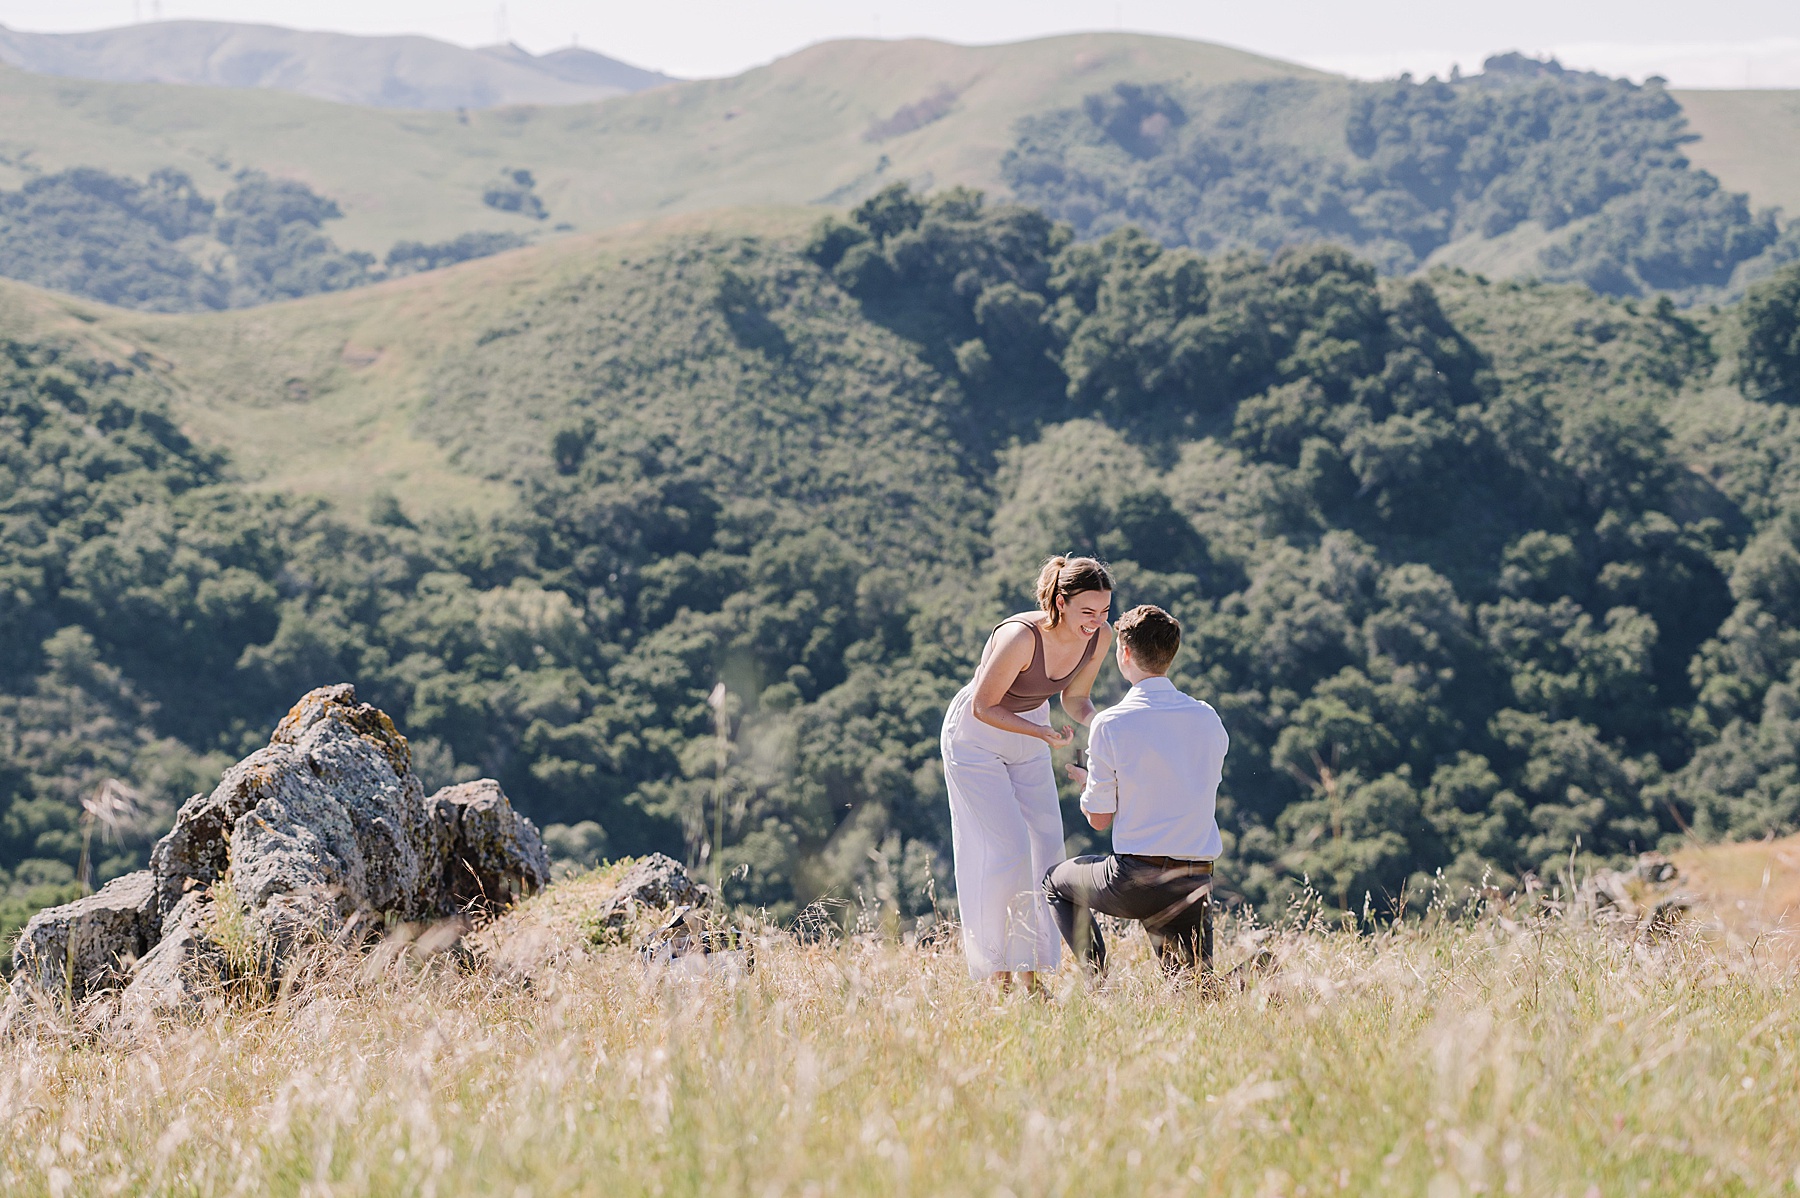 Nikkles Photography, central California coast photographer, shares tips for an epic proposal at Prefumo Canyon in SLO-county